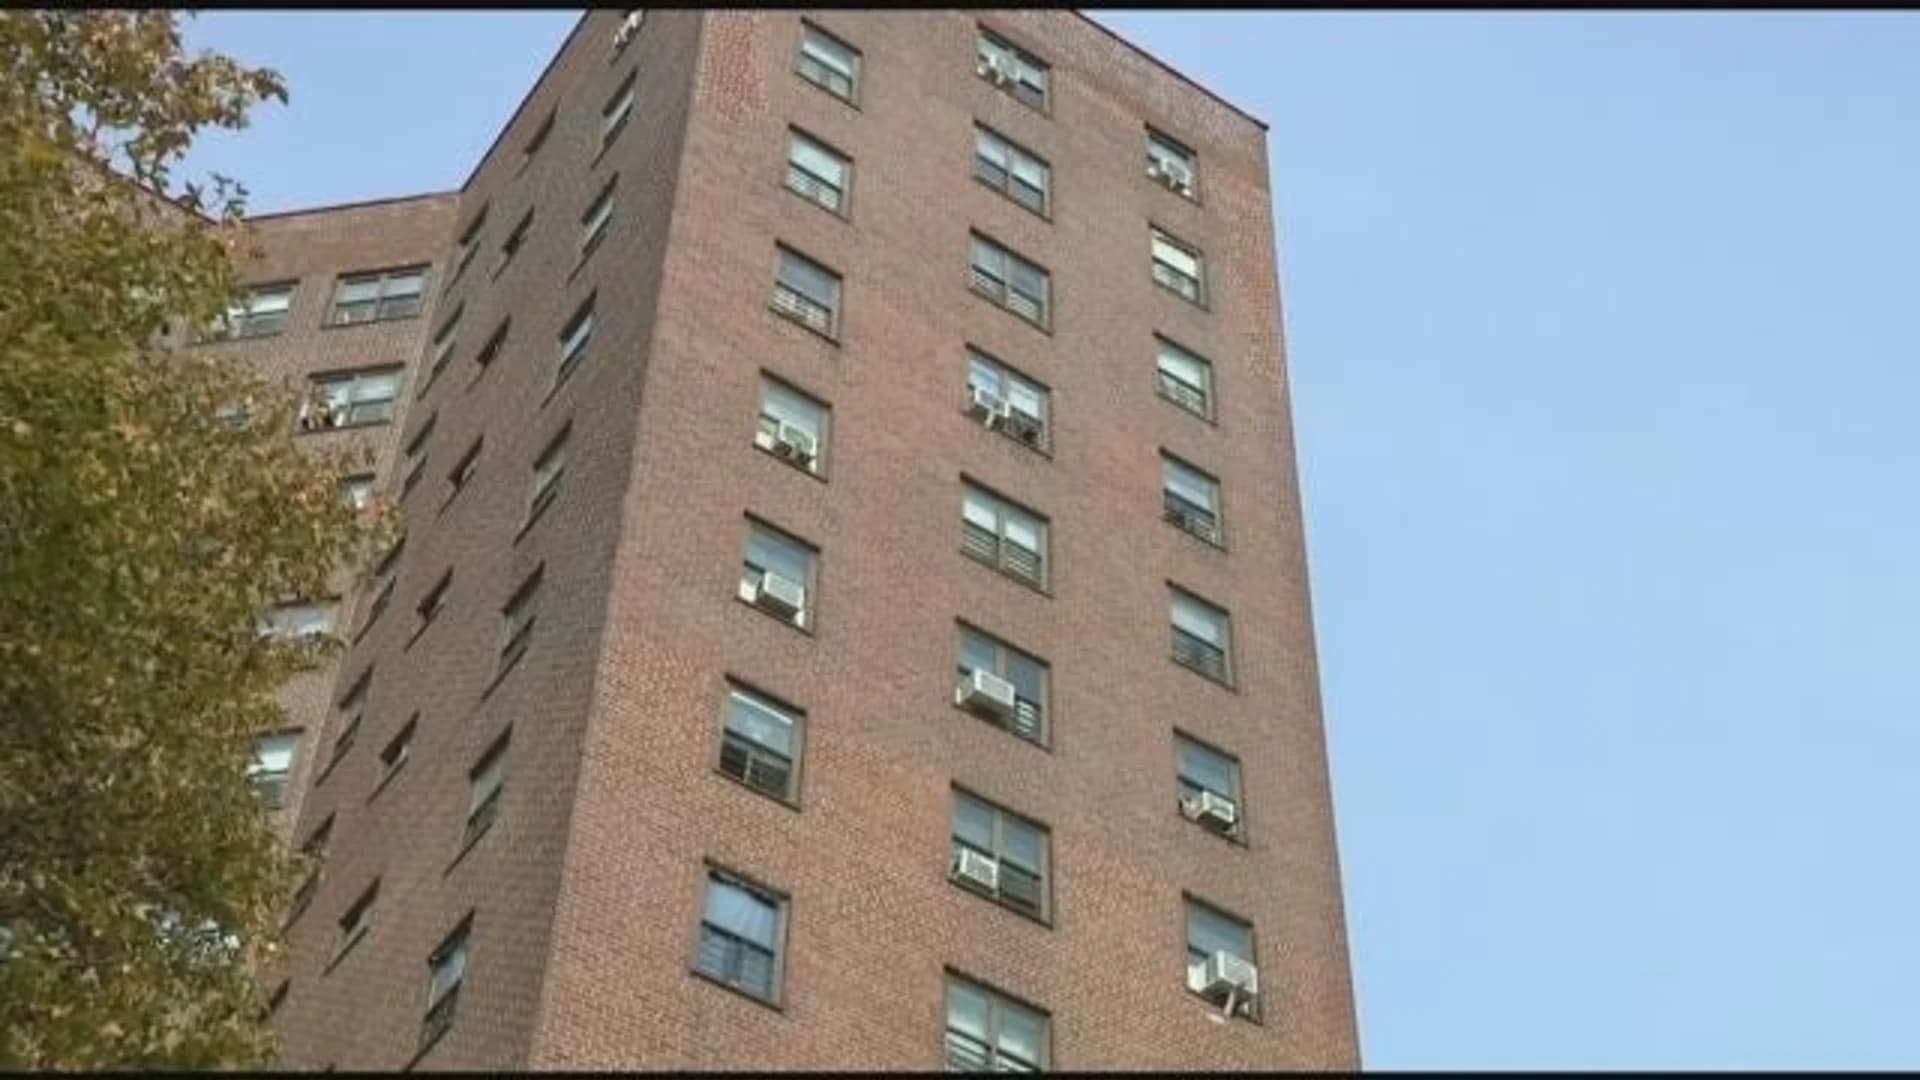 Police: 7-year-old boy falls from window at Bronx River Houses